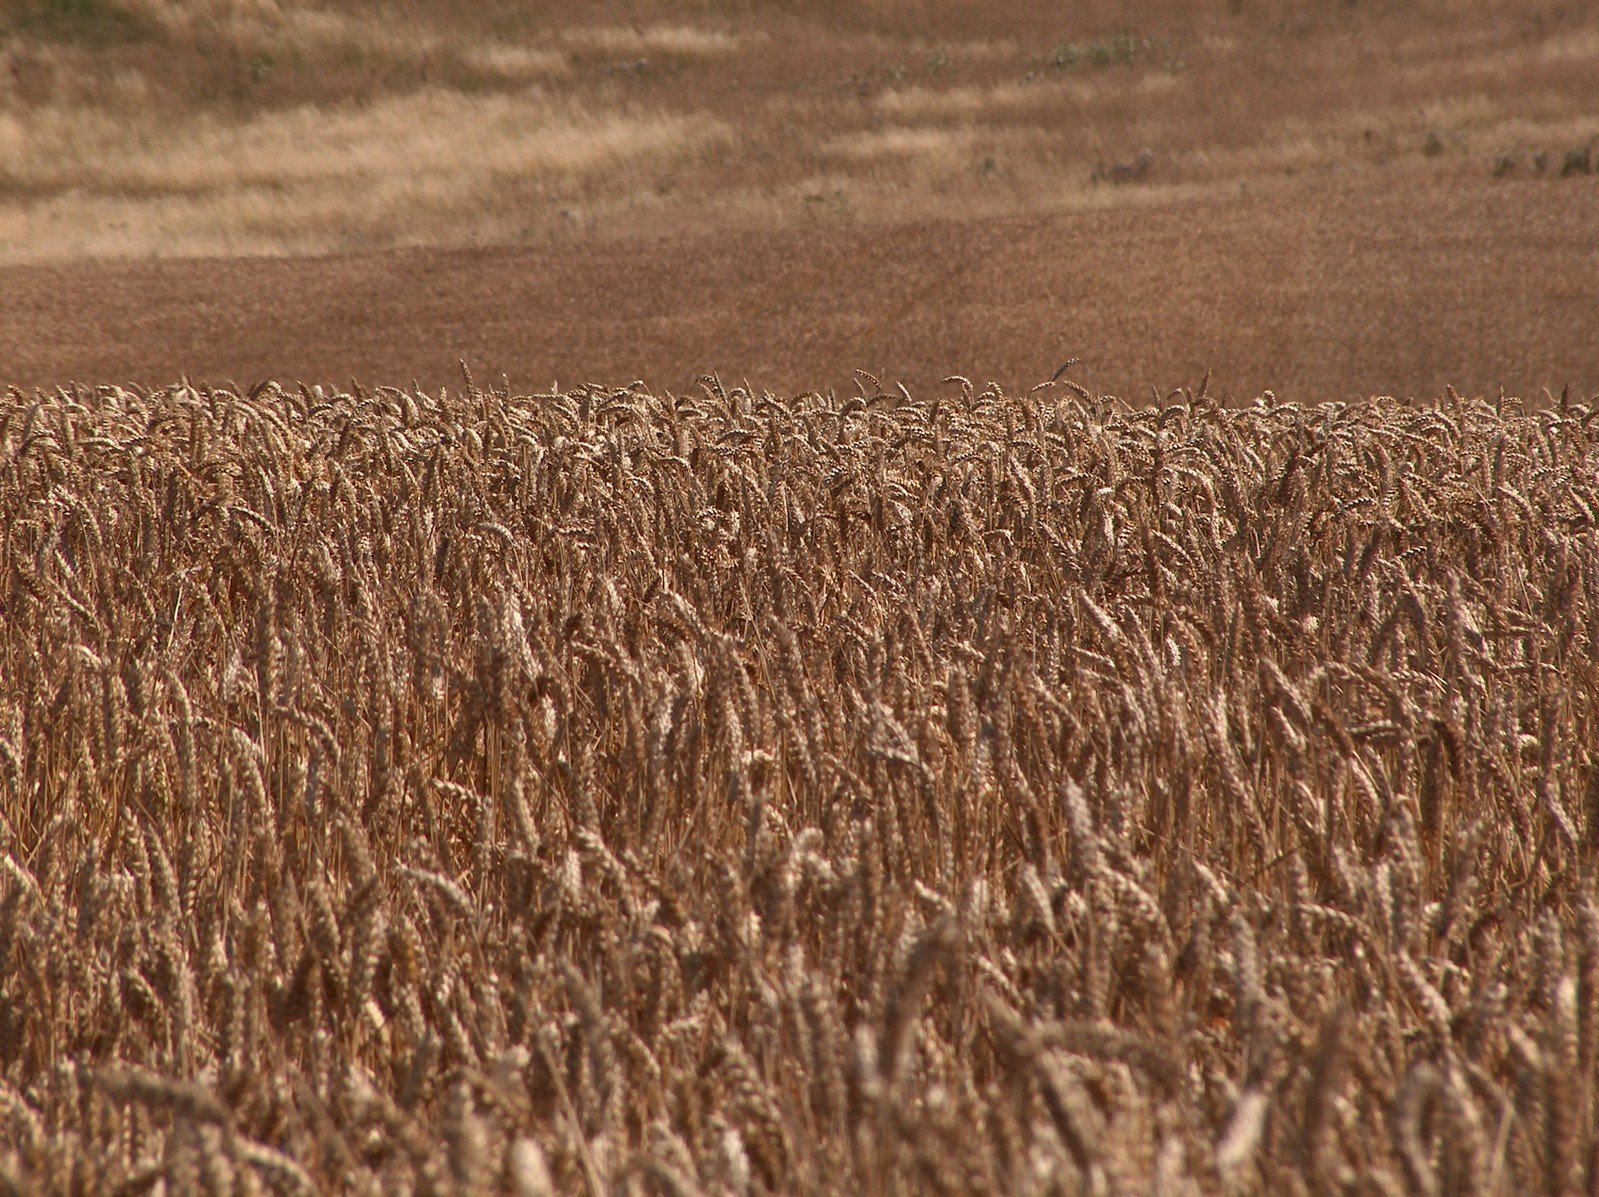 an image of a field that has been eaten by someone